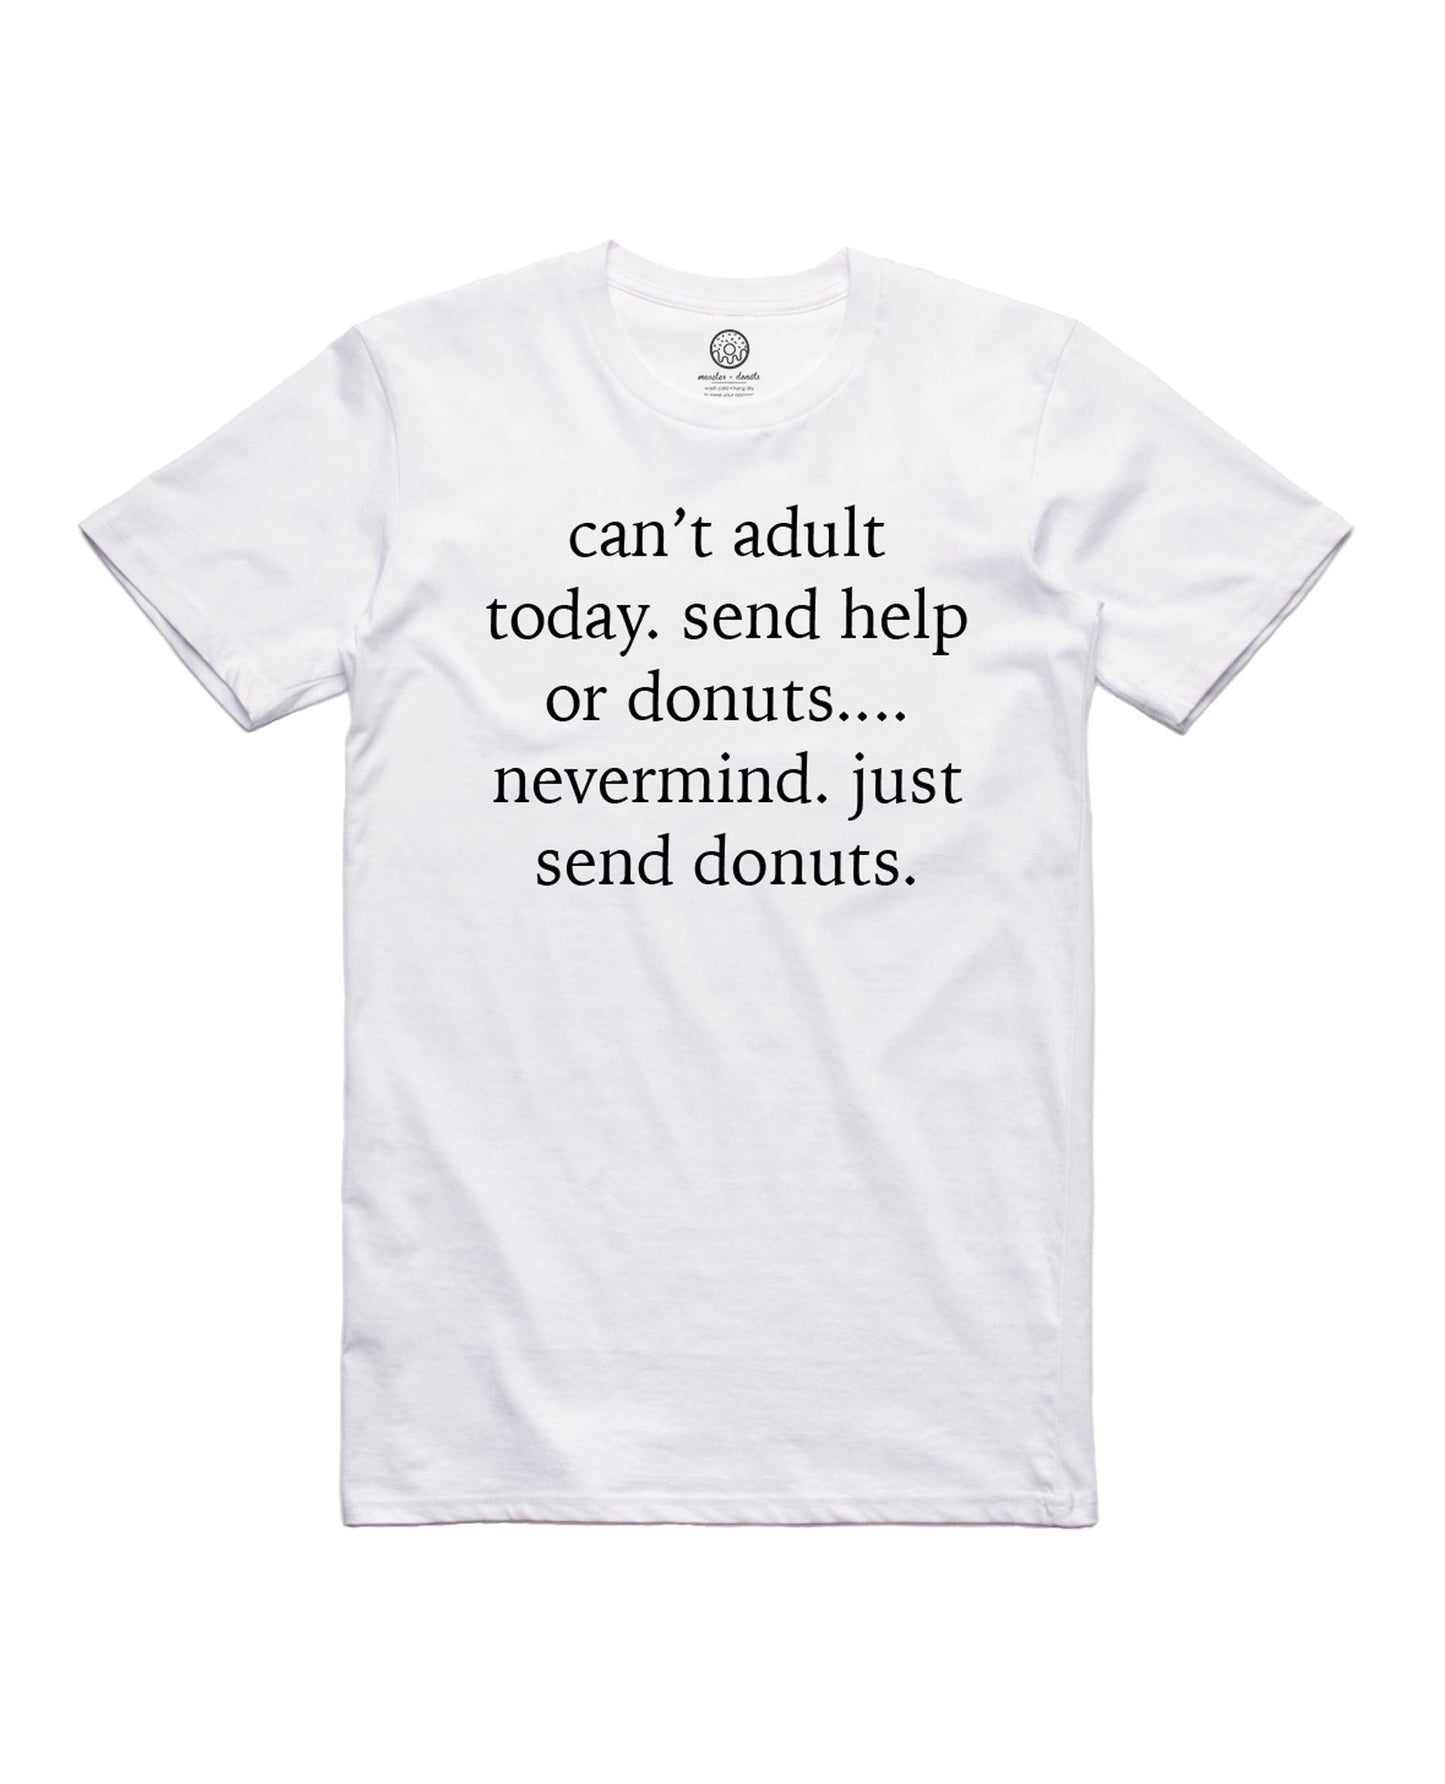 Send Donuts White Tee (Unisex Size)